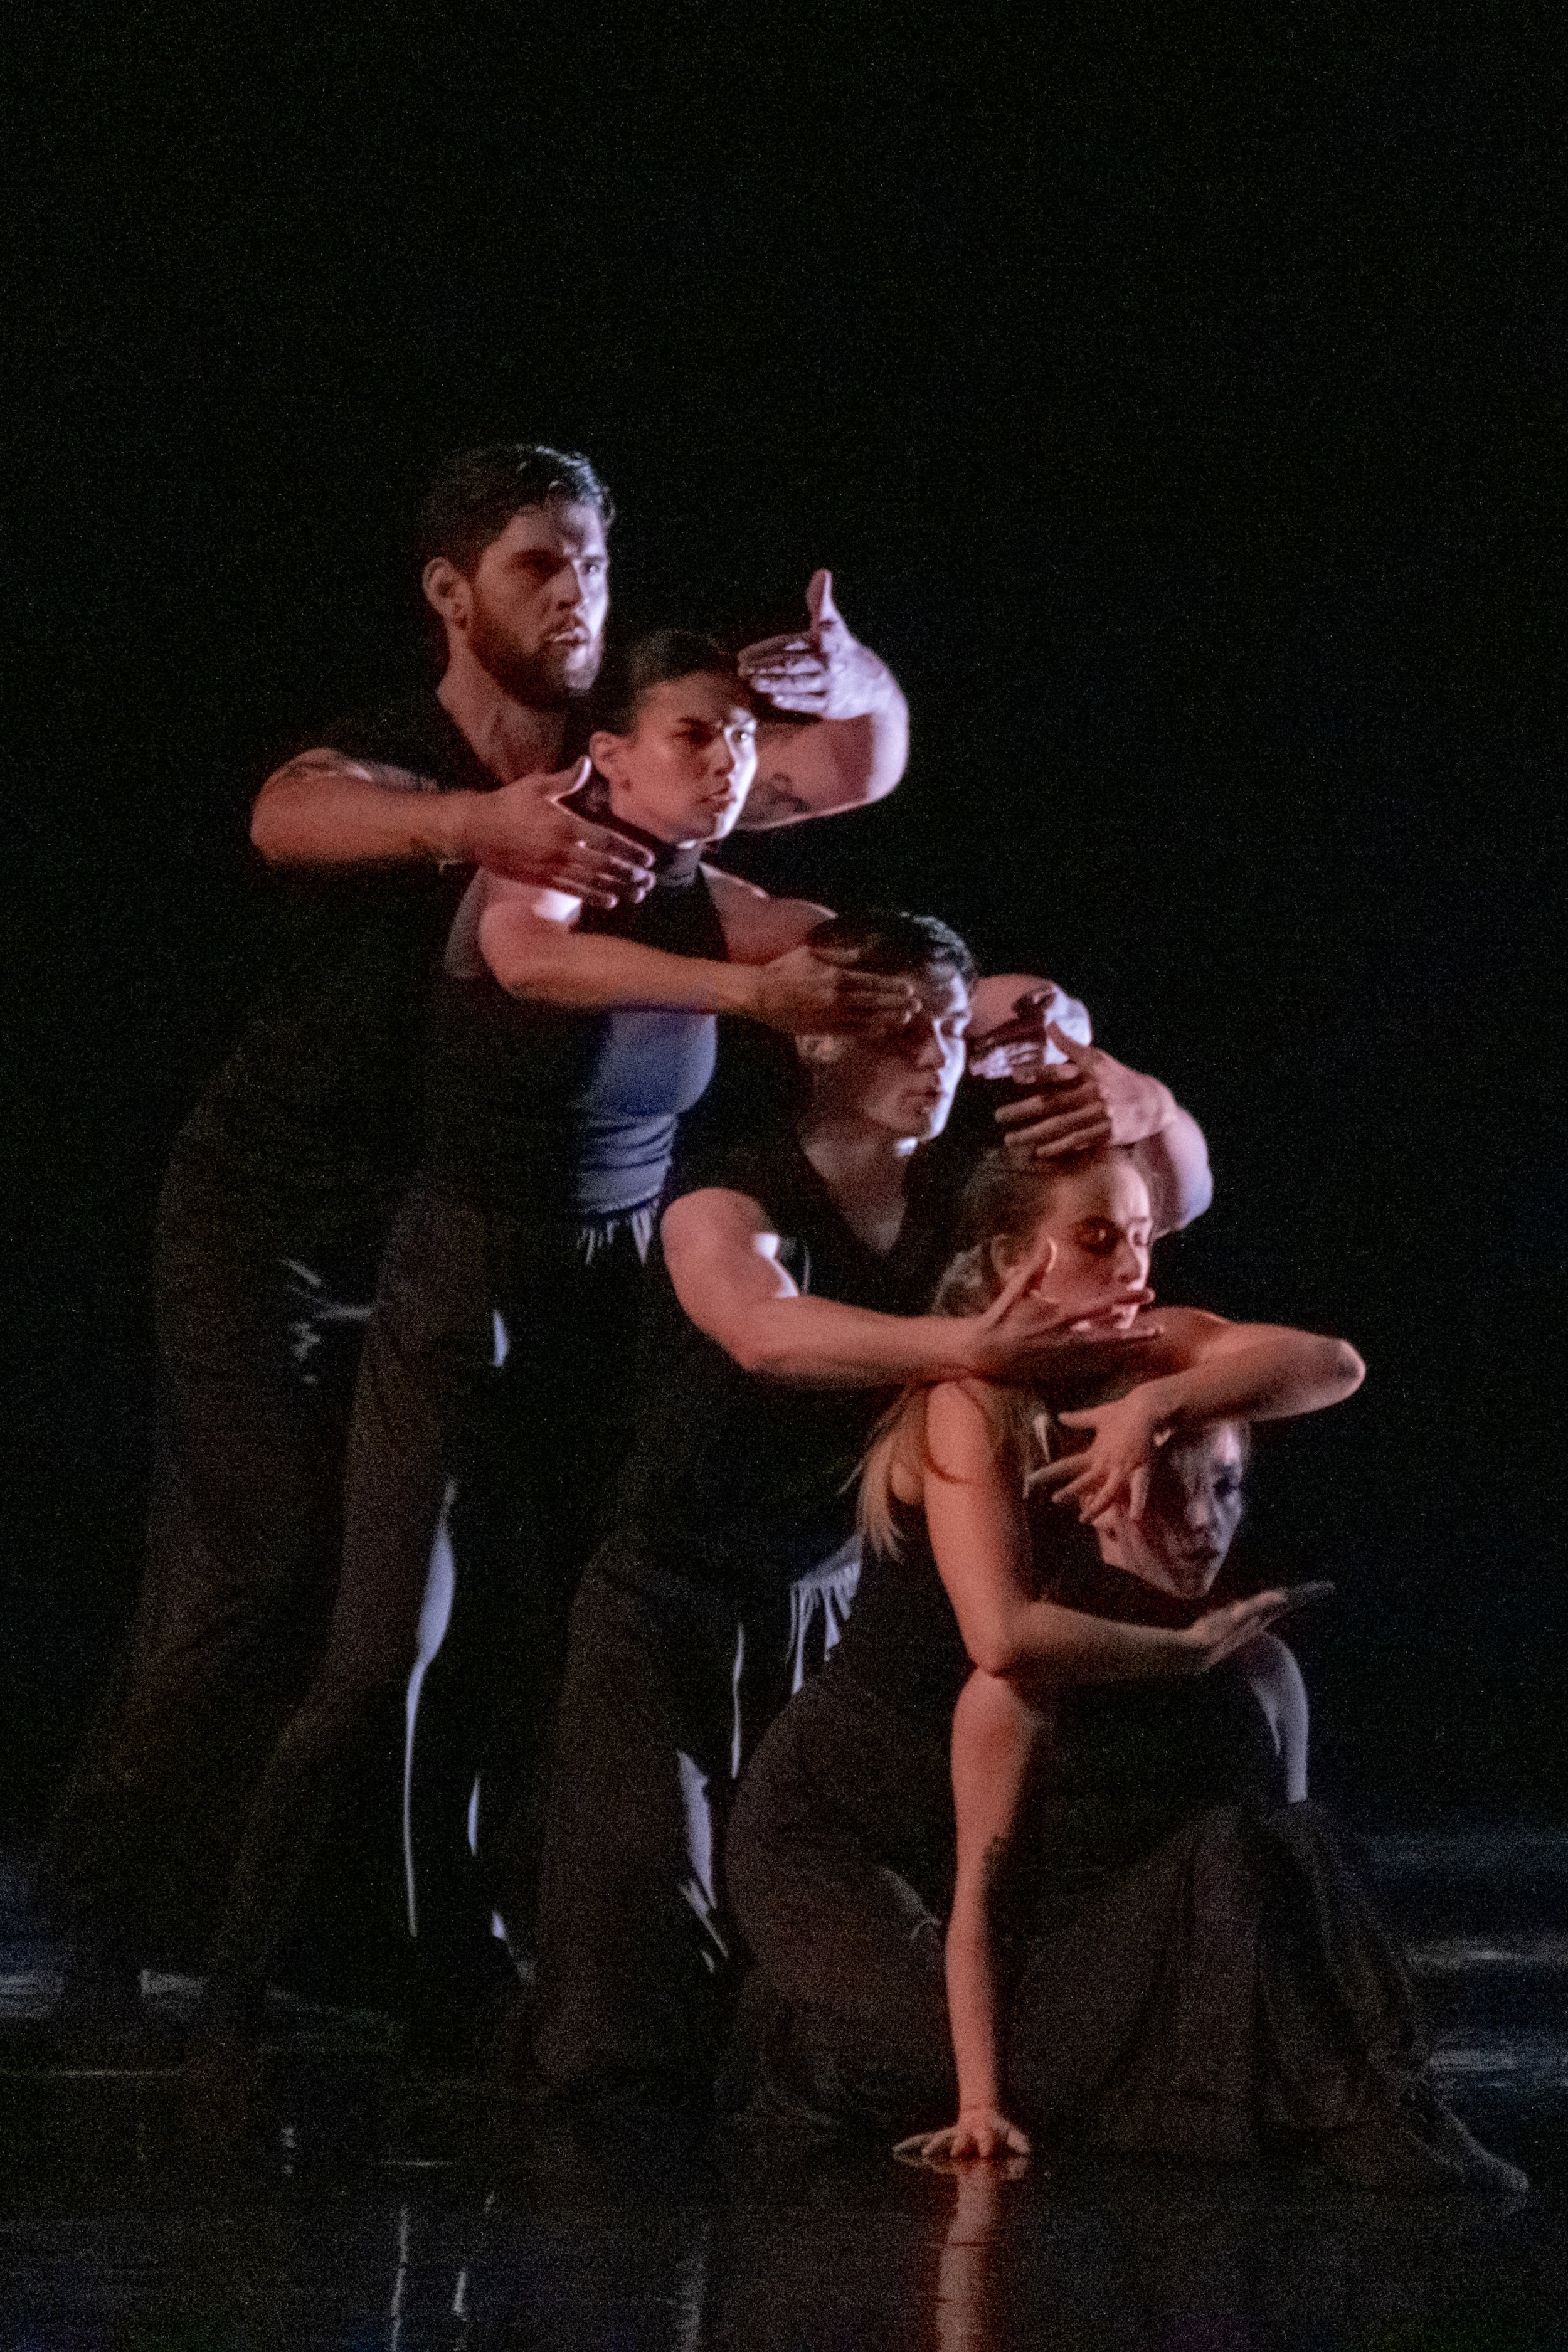  From L to R, dancers Michael Hamilton, Erille Weiss, Simon Lathrop, Marley Gazaryants, and Kate Chandler rehearse a piece choreographed by student choreophraher Simon Lathrop for the Santa Monica College Contemporary Dance Performance Synapse at Bro